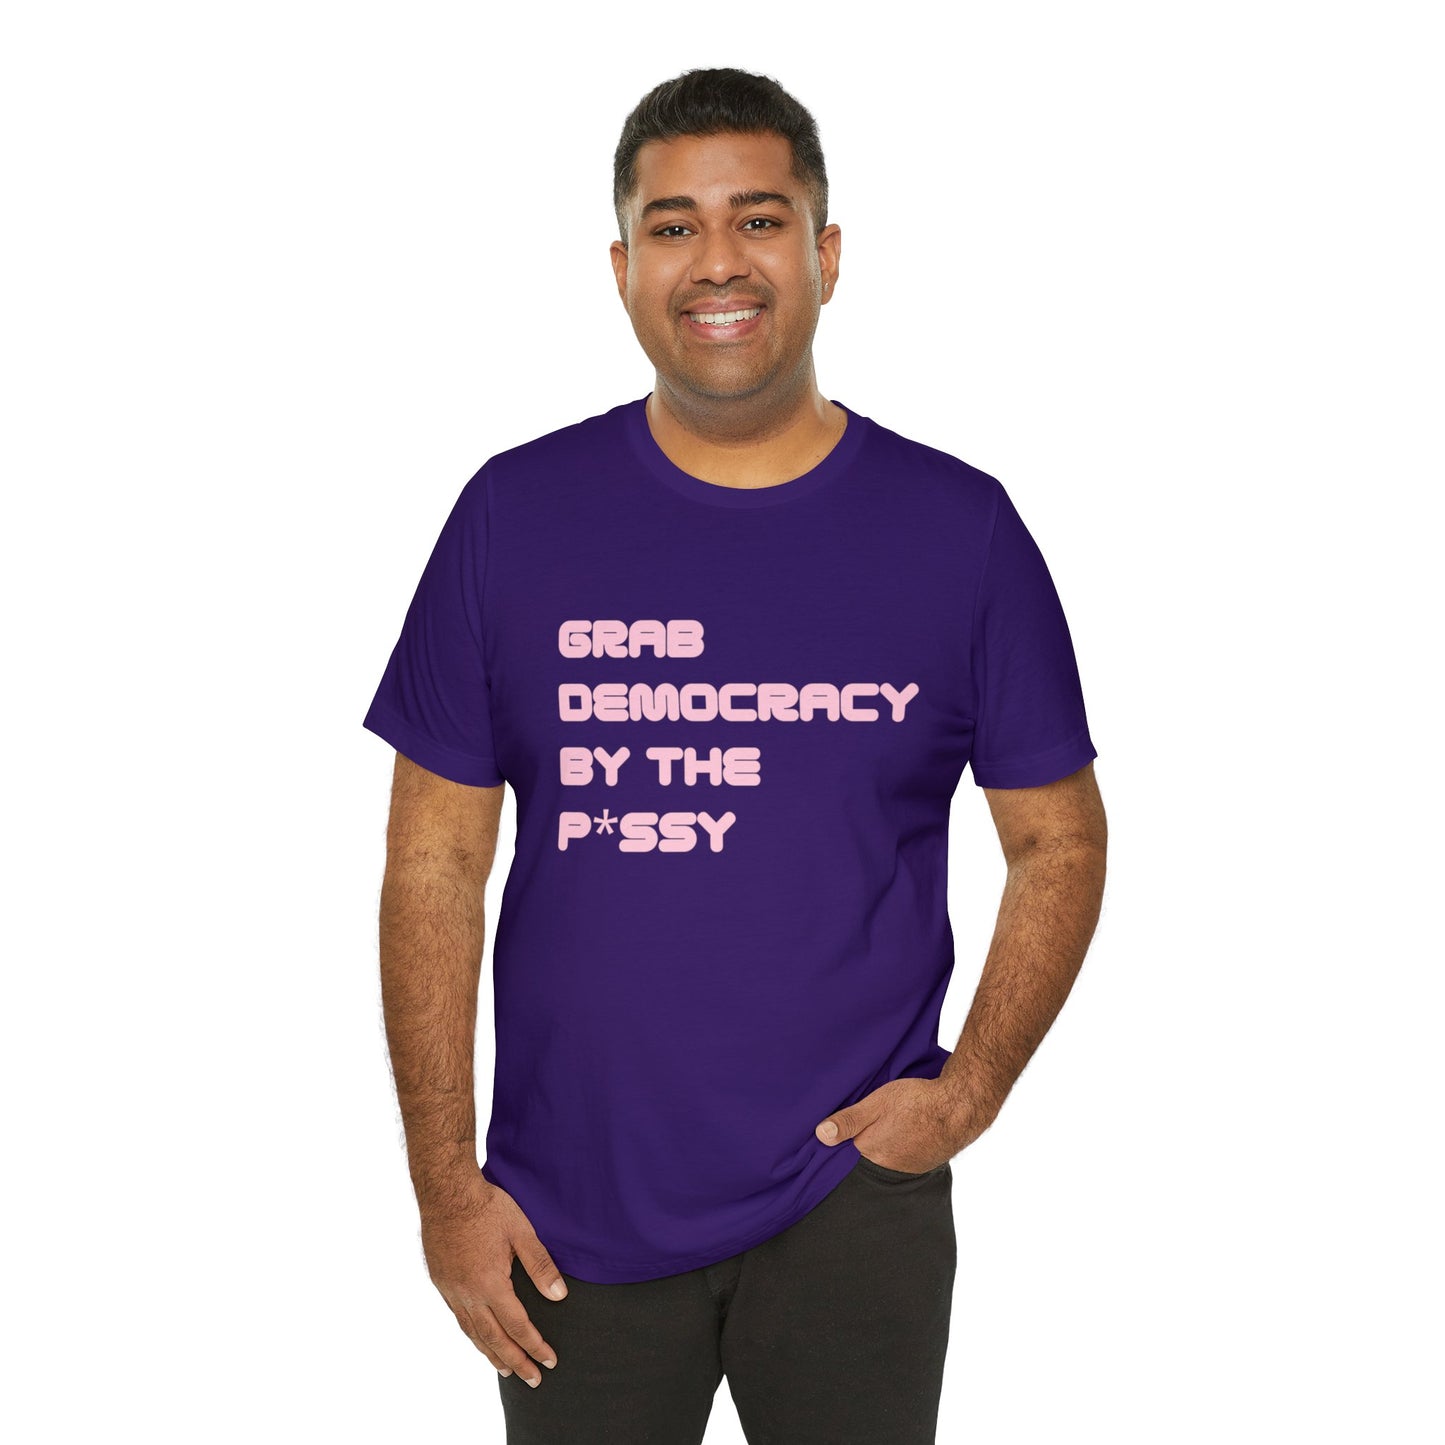 Grab Democracy By The P*ssy PG13